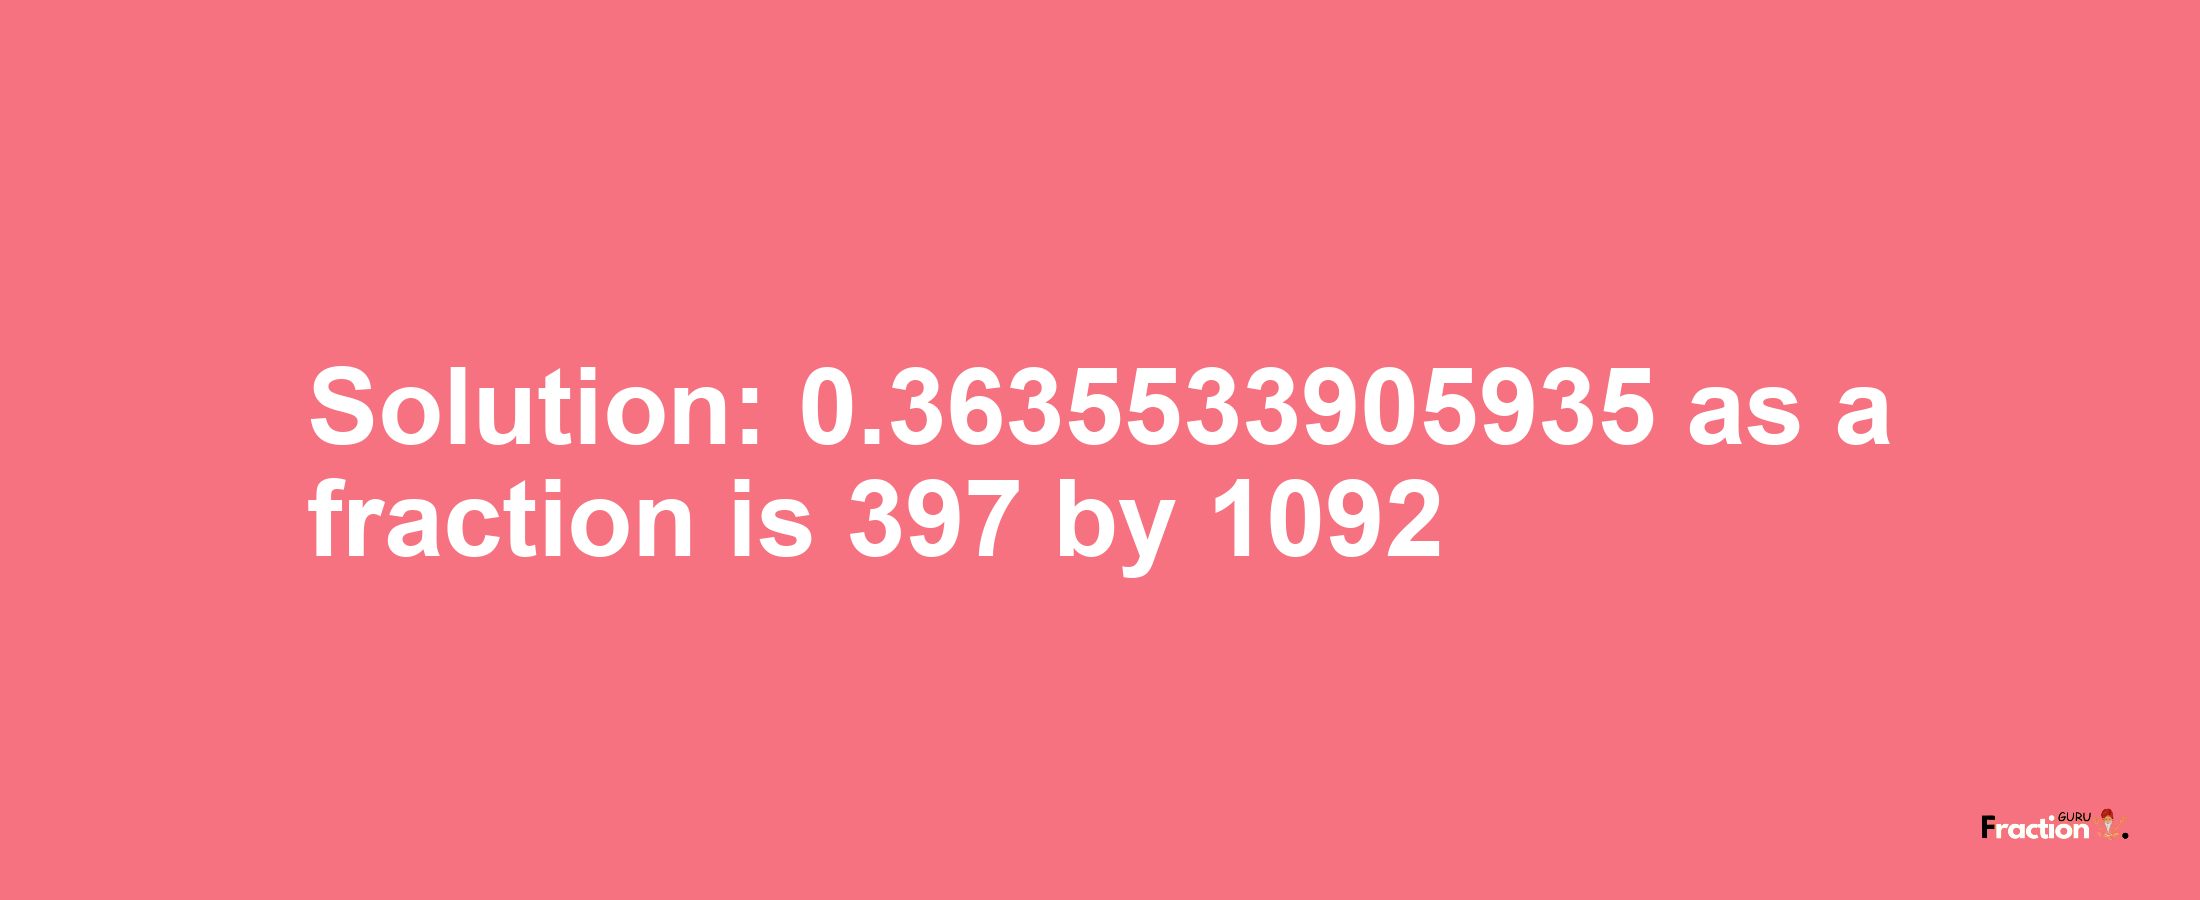 Solution:0.3635533905935 as a fraction is 397/1092